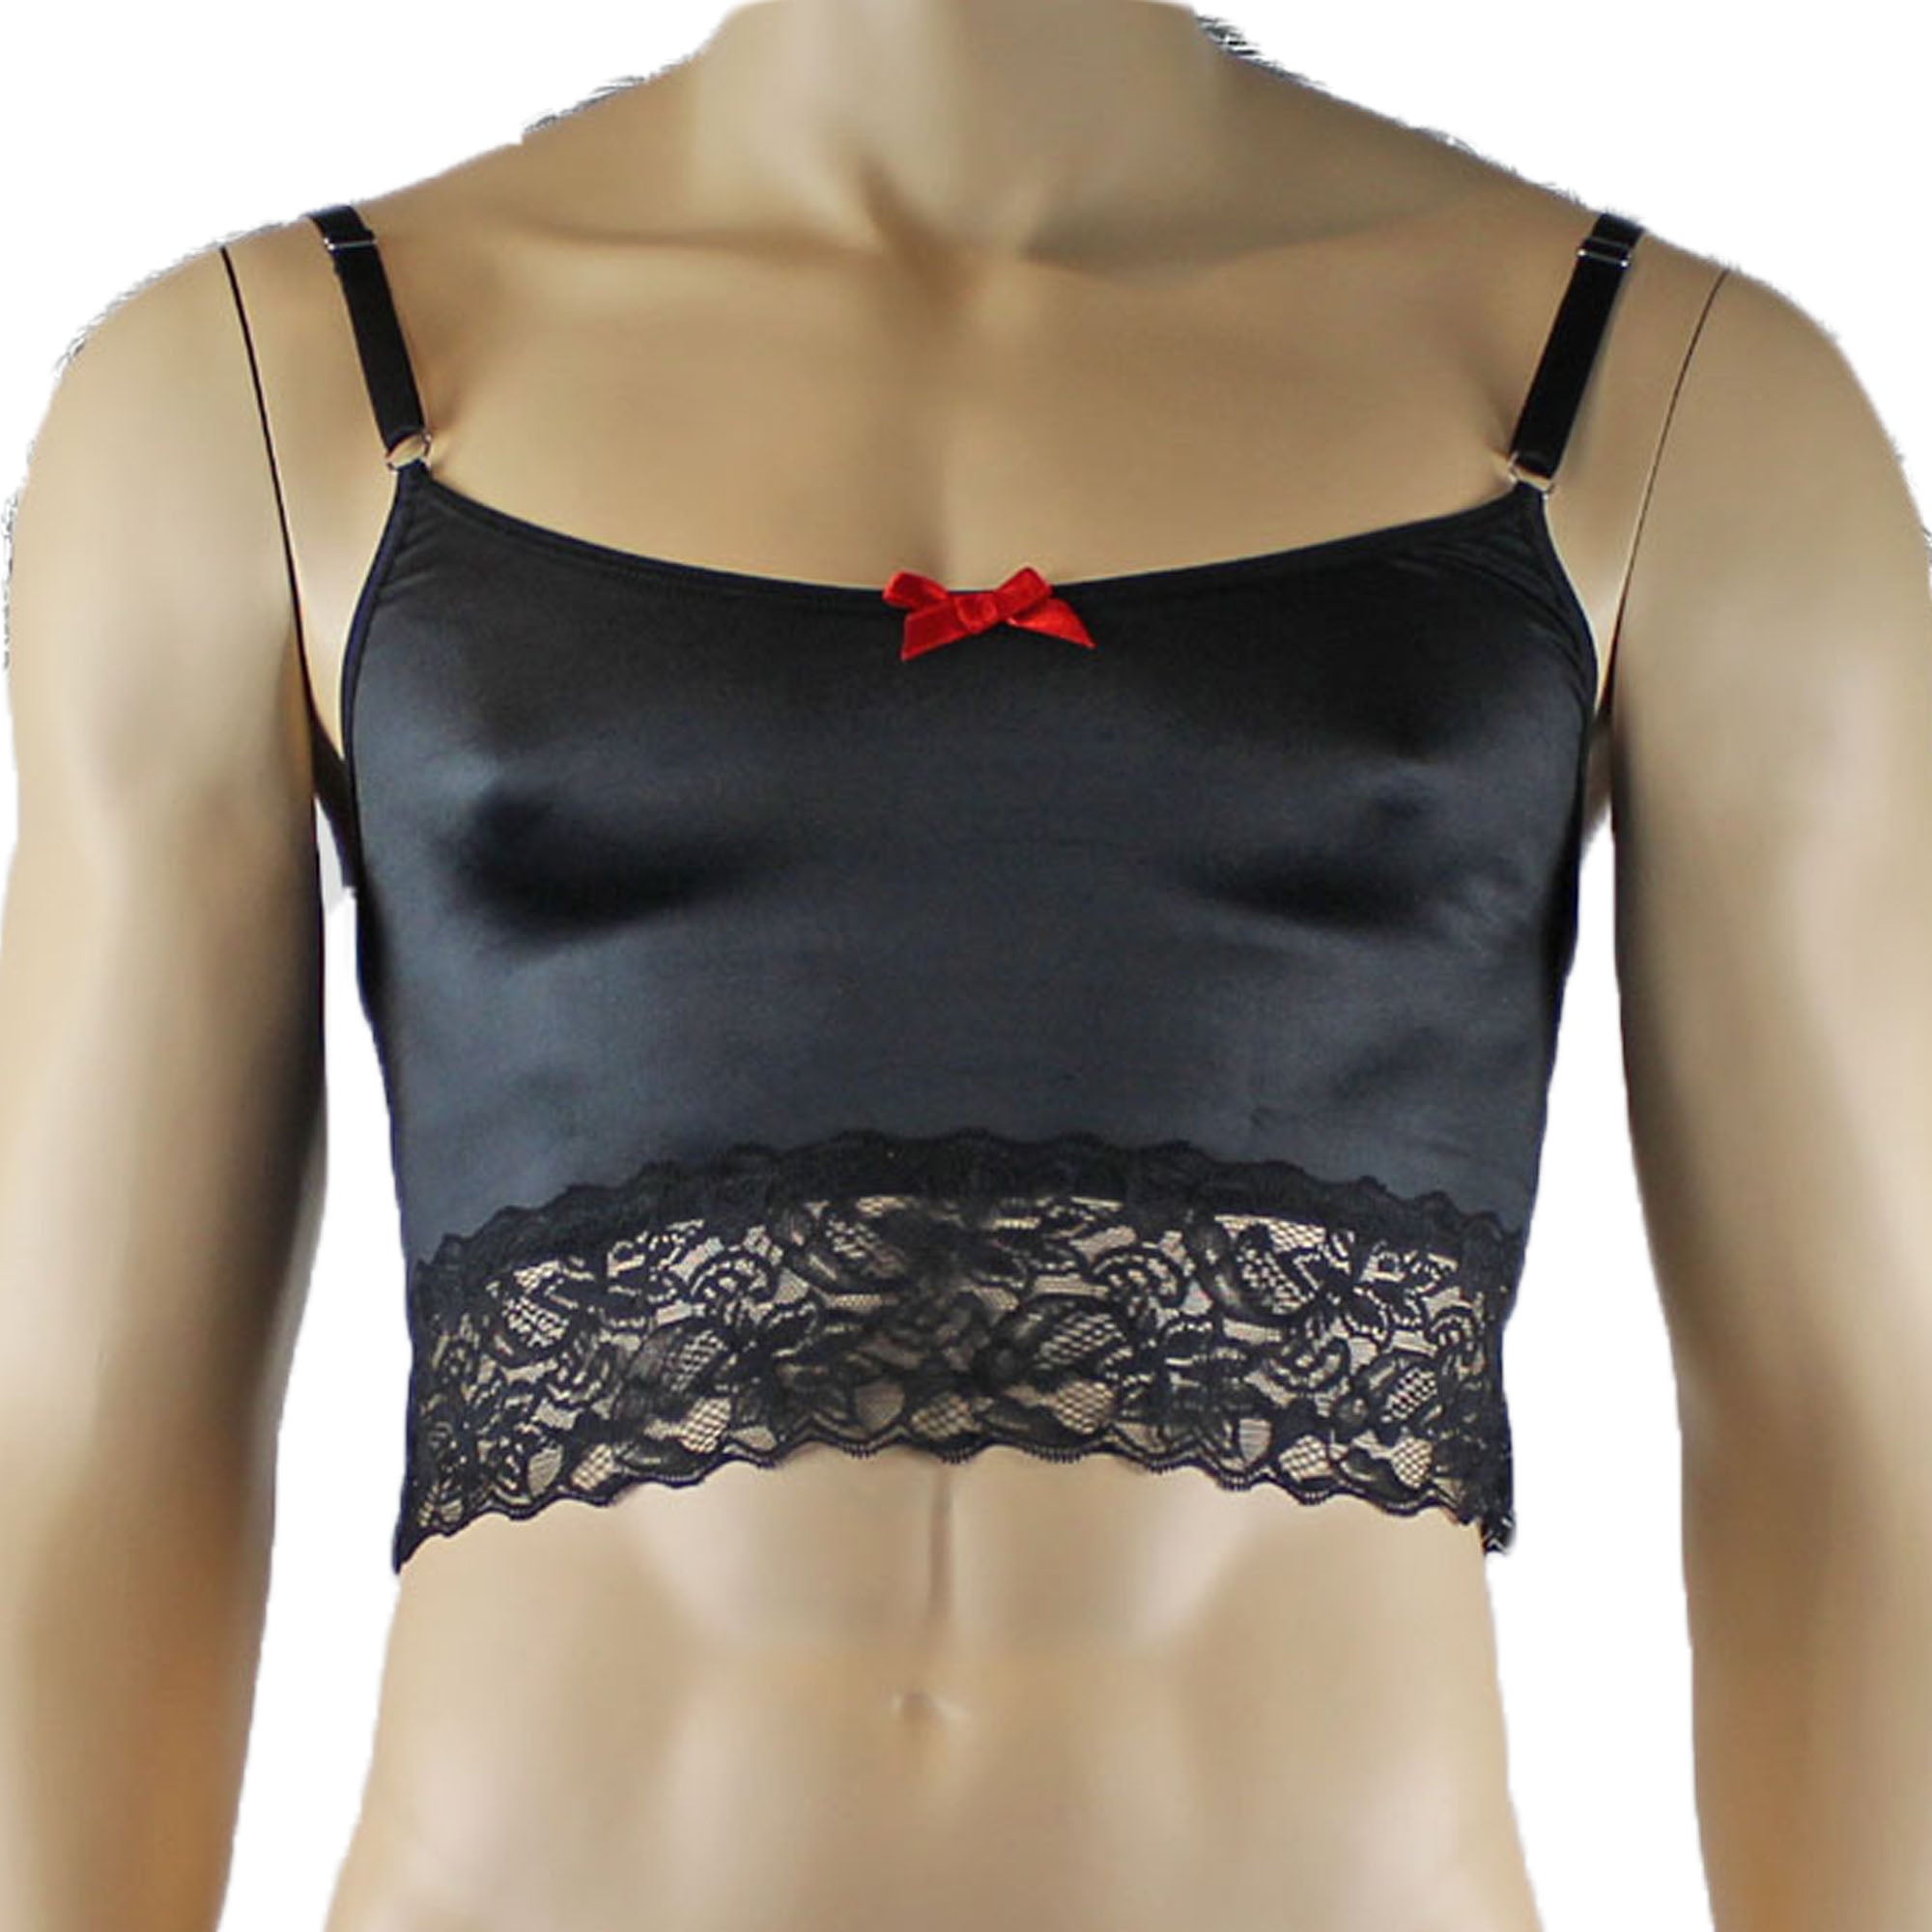 Mens Joanne Satin & Lace Crop Cami Top - Sizes up to 3XL Black and Black Lace